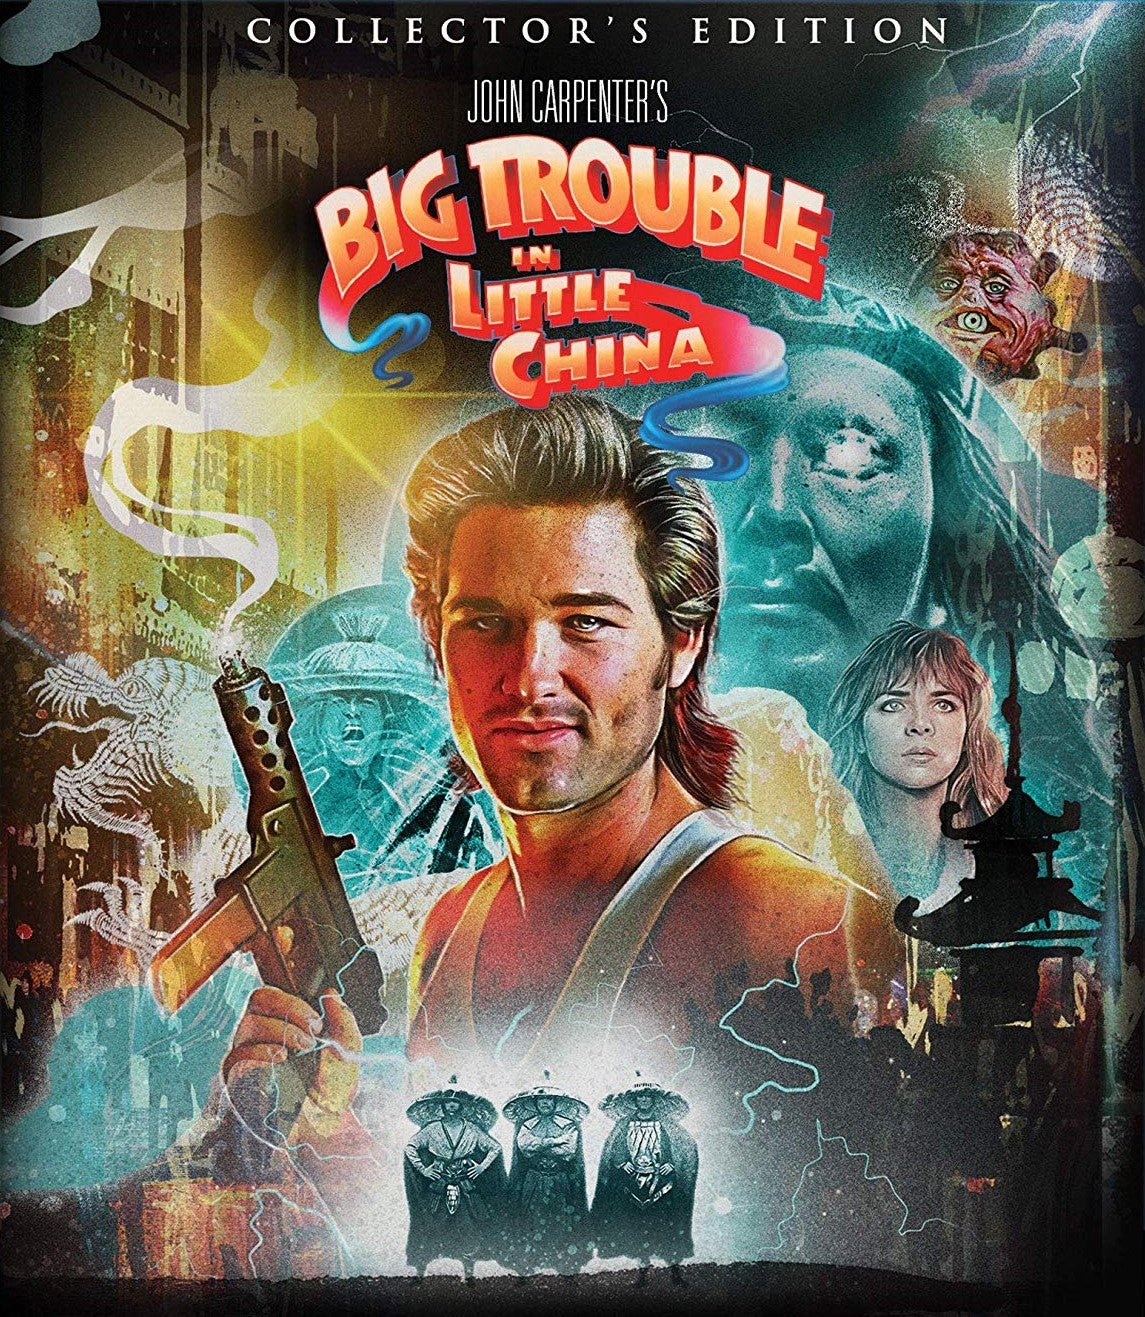 Big Trouble In Little China (Collectors Edition) Blu-Ray Blu-Ray